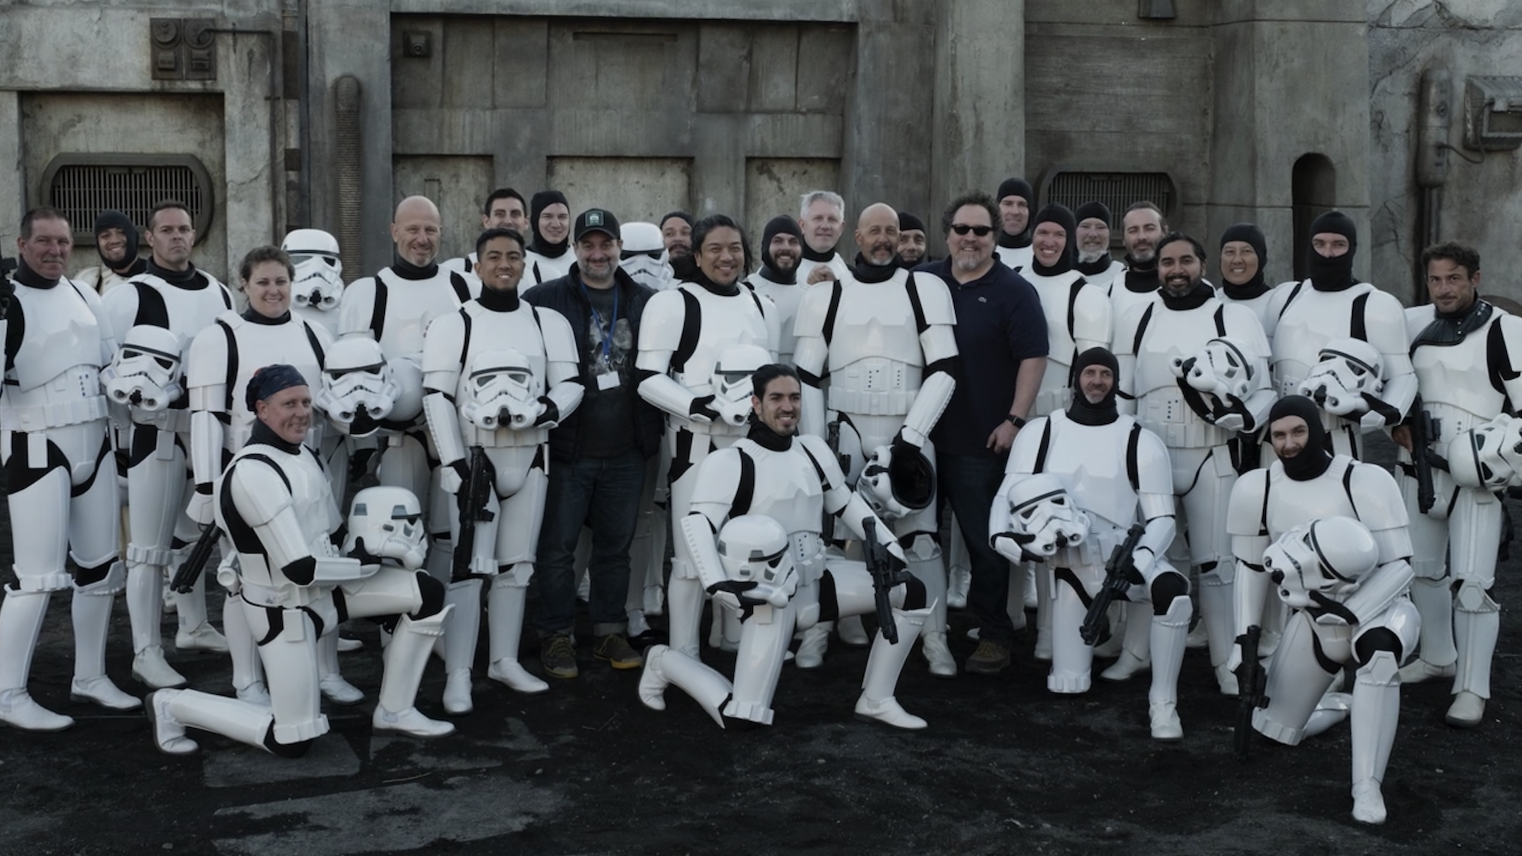 The 501st taking a photo with Jon Favreau and some other crew members